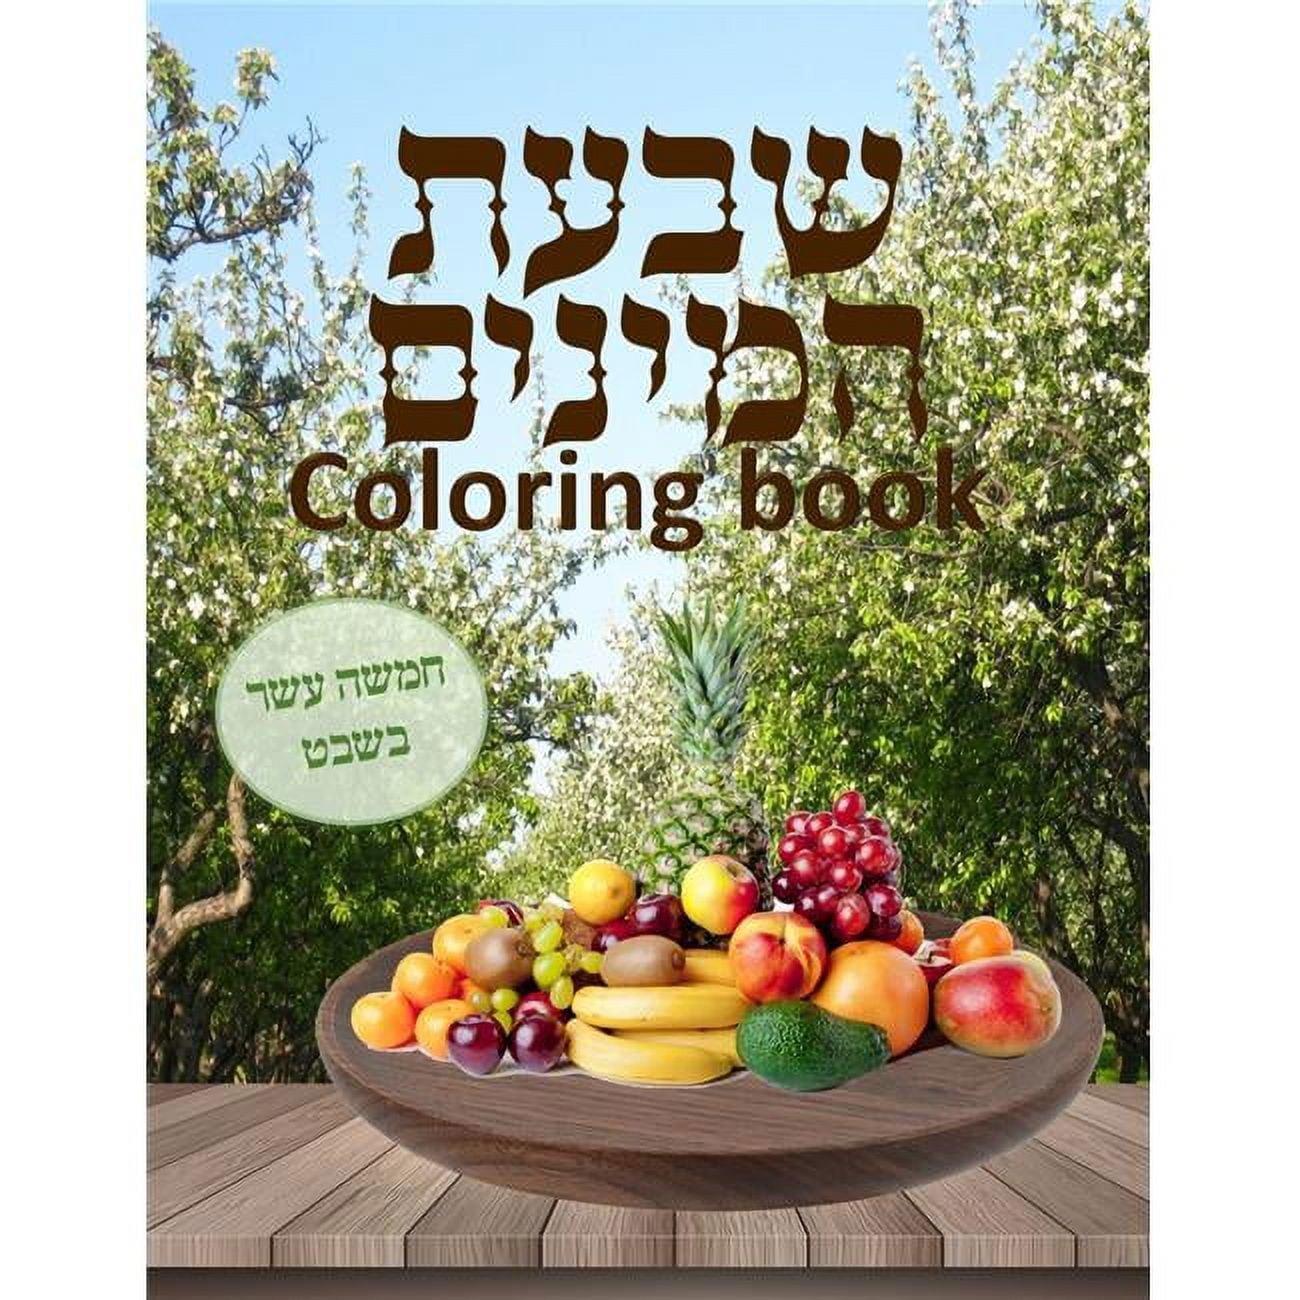 Picture of Mitzvah Friends 95906 TU Bshvat Coloring Book